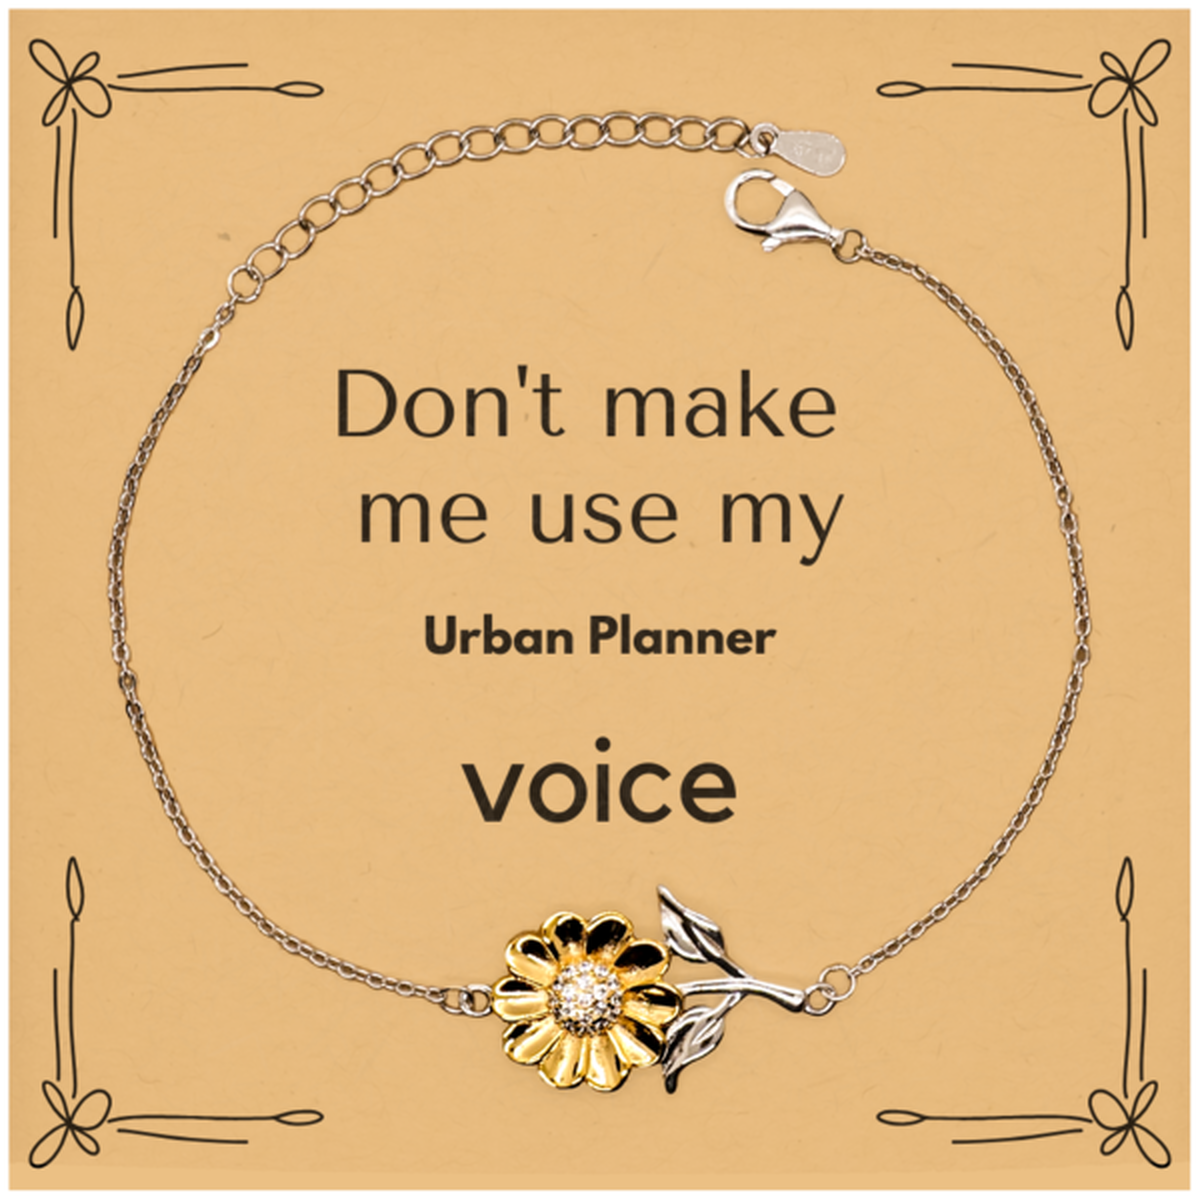 Don't make me use my Urban Planner voice, Sarcasm Urban Planner Card Gifts, Christmas Urban Planner Sunflower Bracelet Birthday Unique Gifts For Urban Planner Coworkers, Men, Women, Colleague, Friends